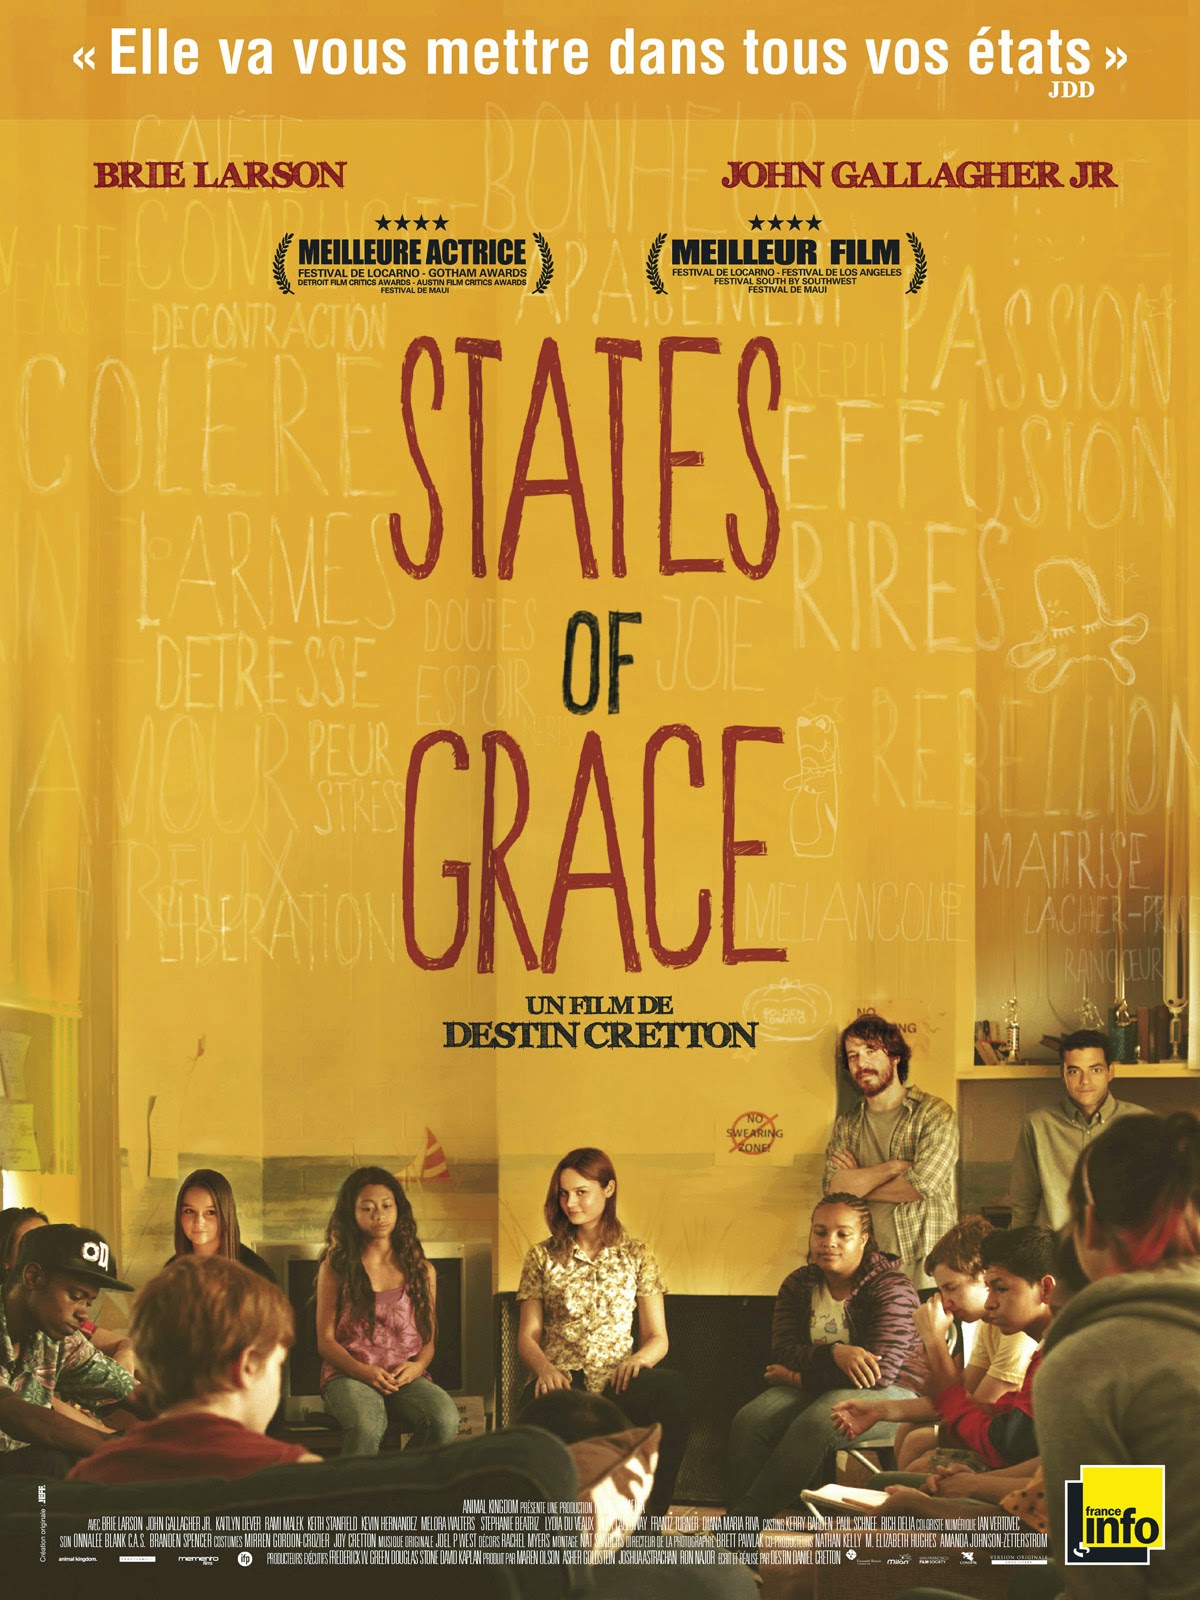 http://fuckingcinephiles.blogspot.fr/2014/04/critique-states-of-grace.html